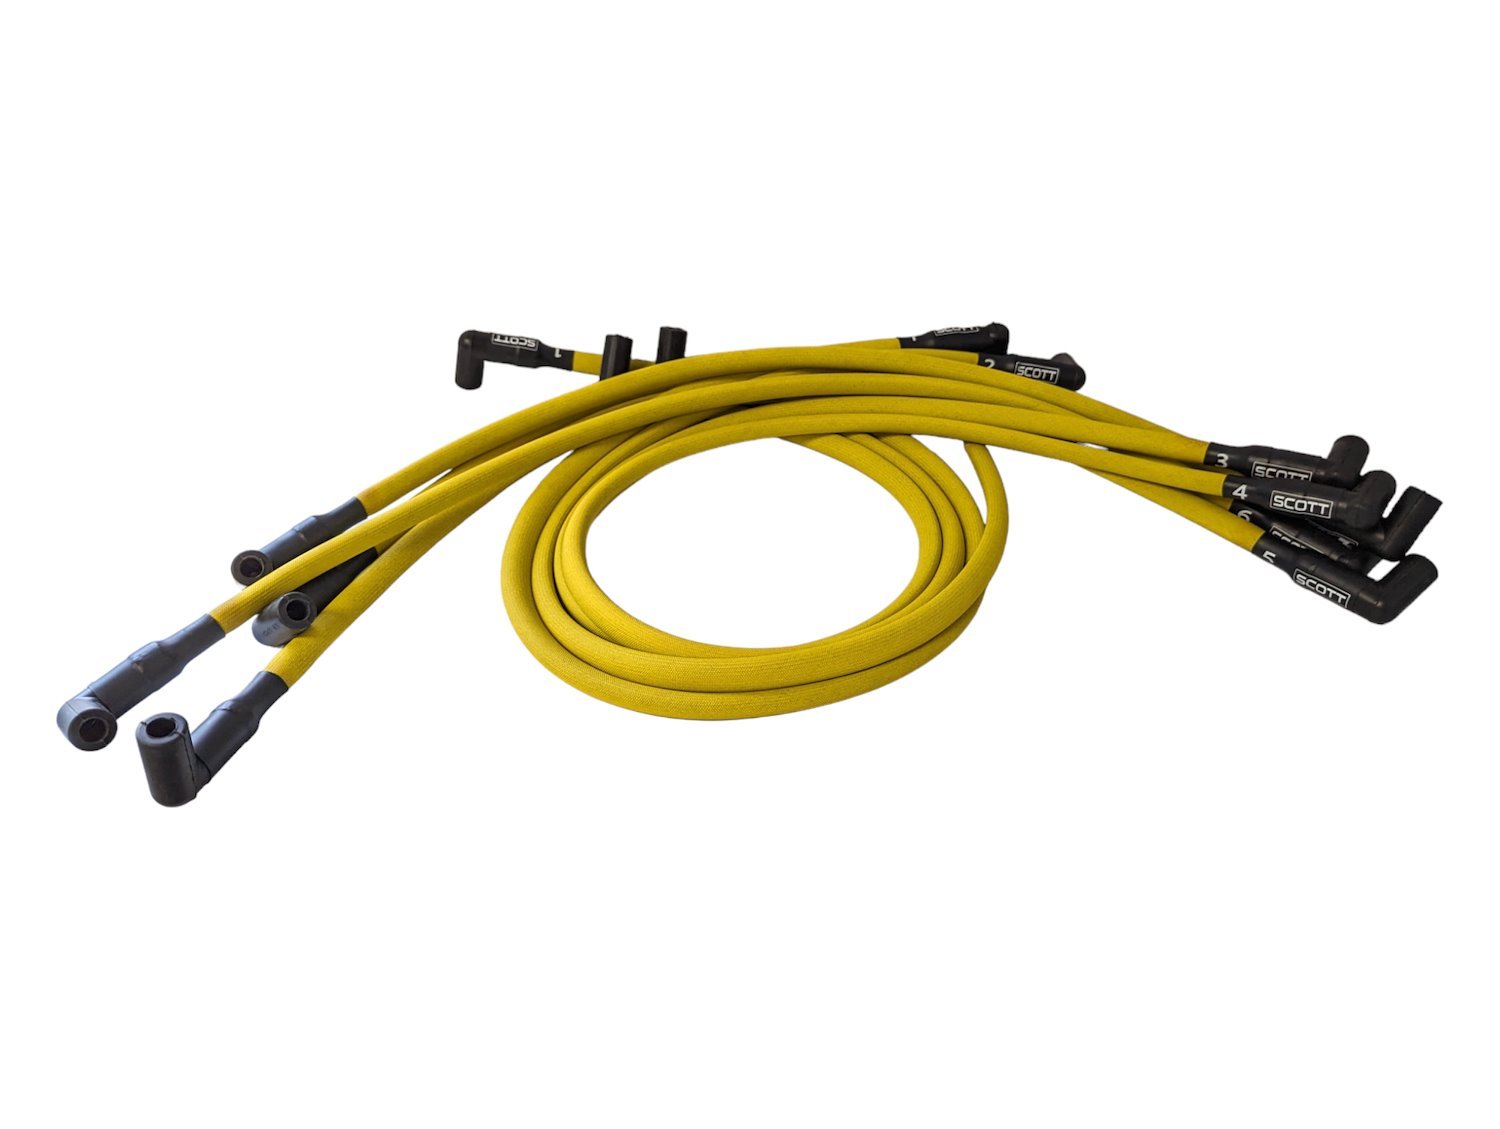 SPW-PS-402-5 High-Performance Fiberglass-Oversleeved Spark Plug Wire Set for Small Block Chevy, Over Valve Cover [Yellow]